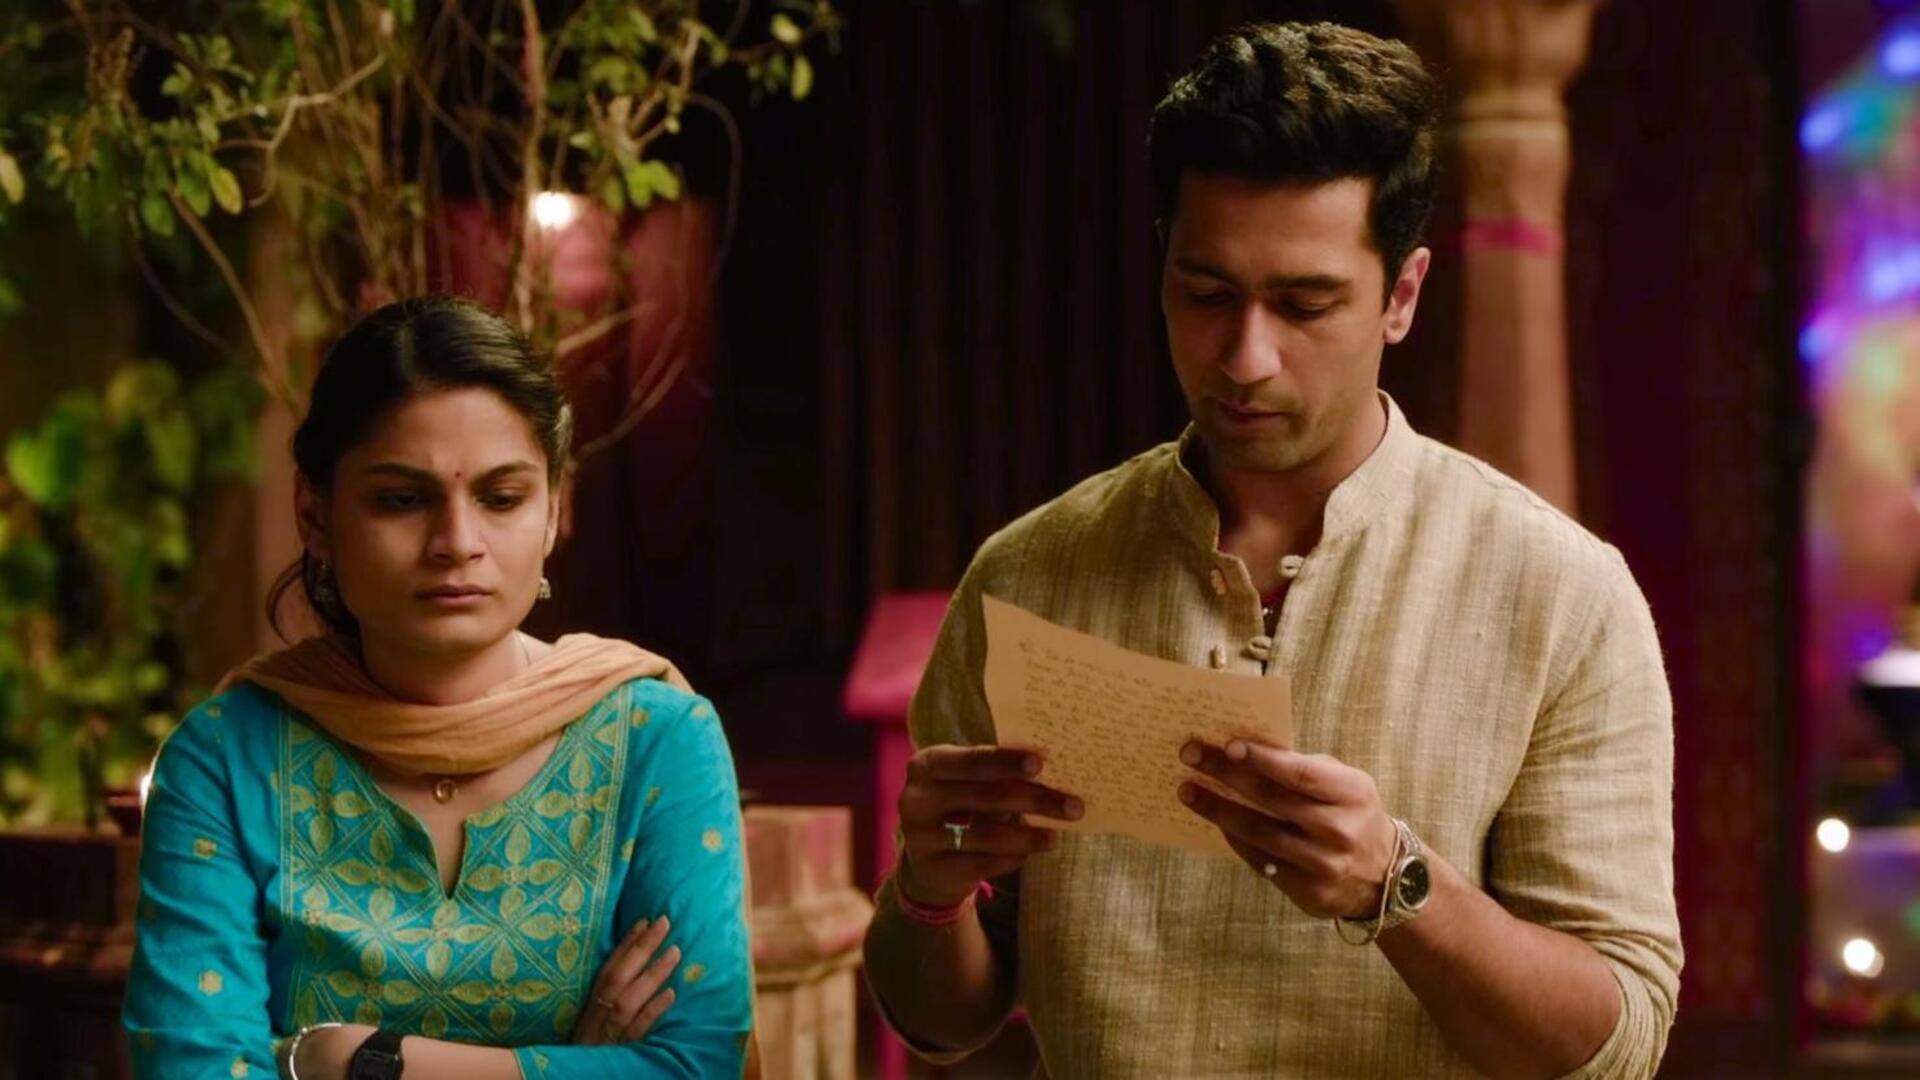 Box office: 'The Great Indian Family' has no takers